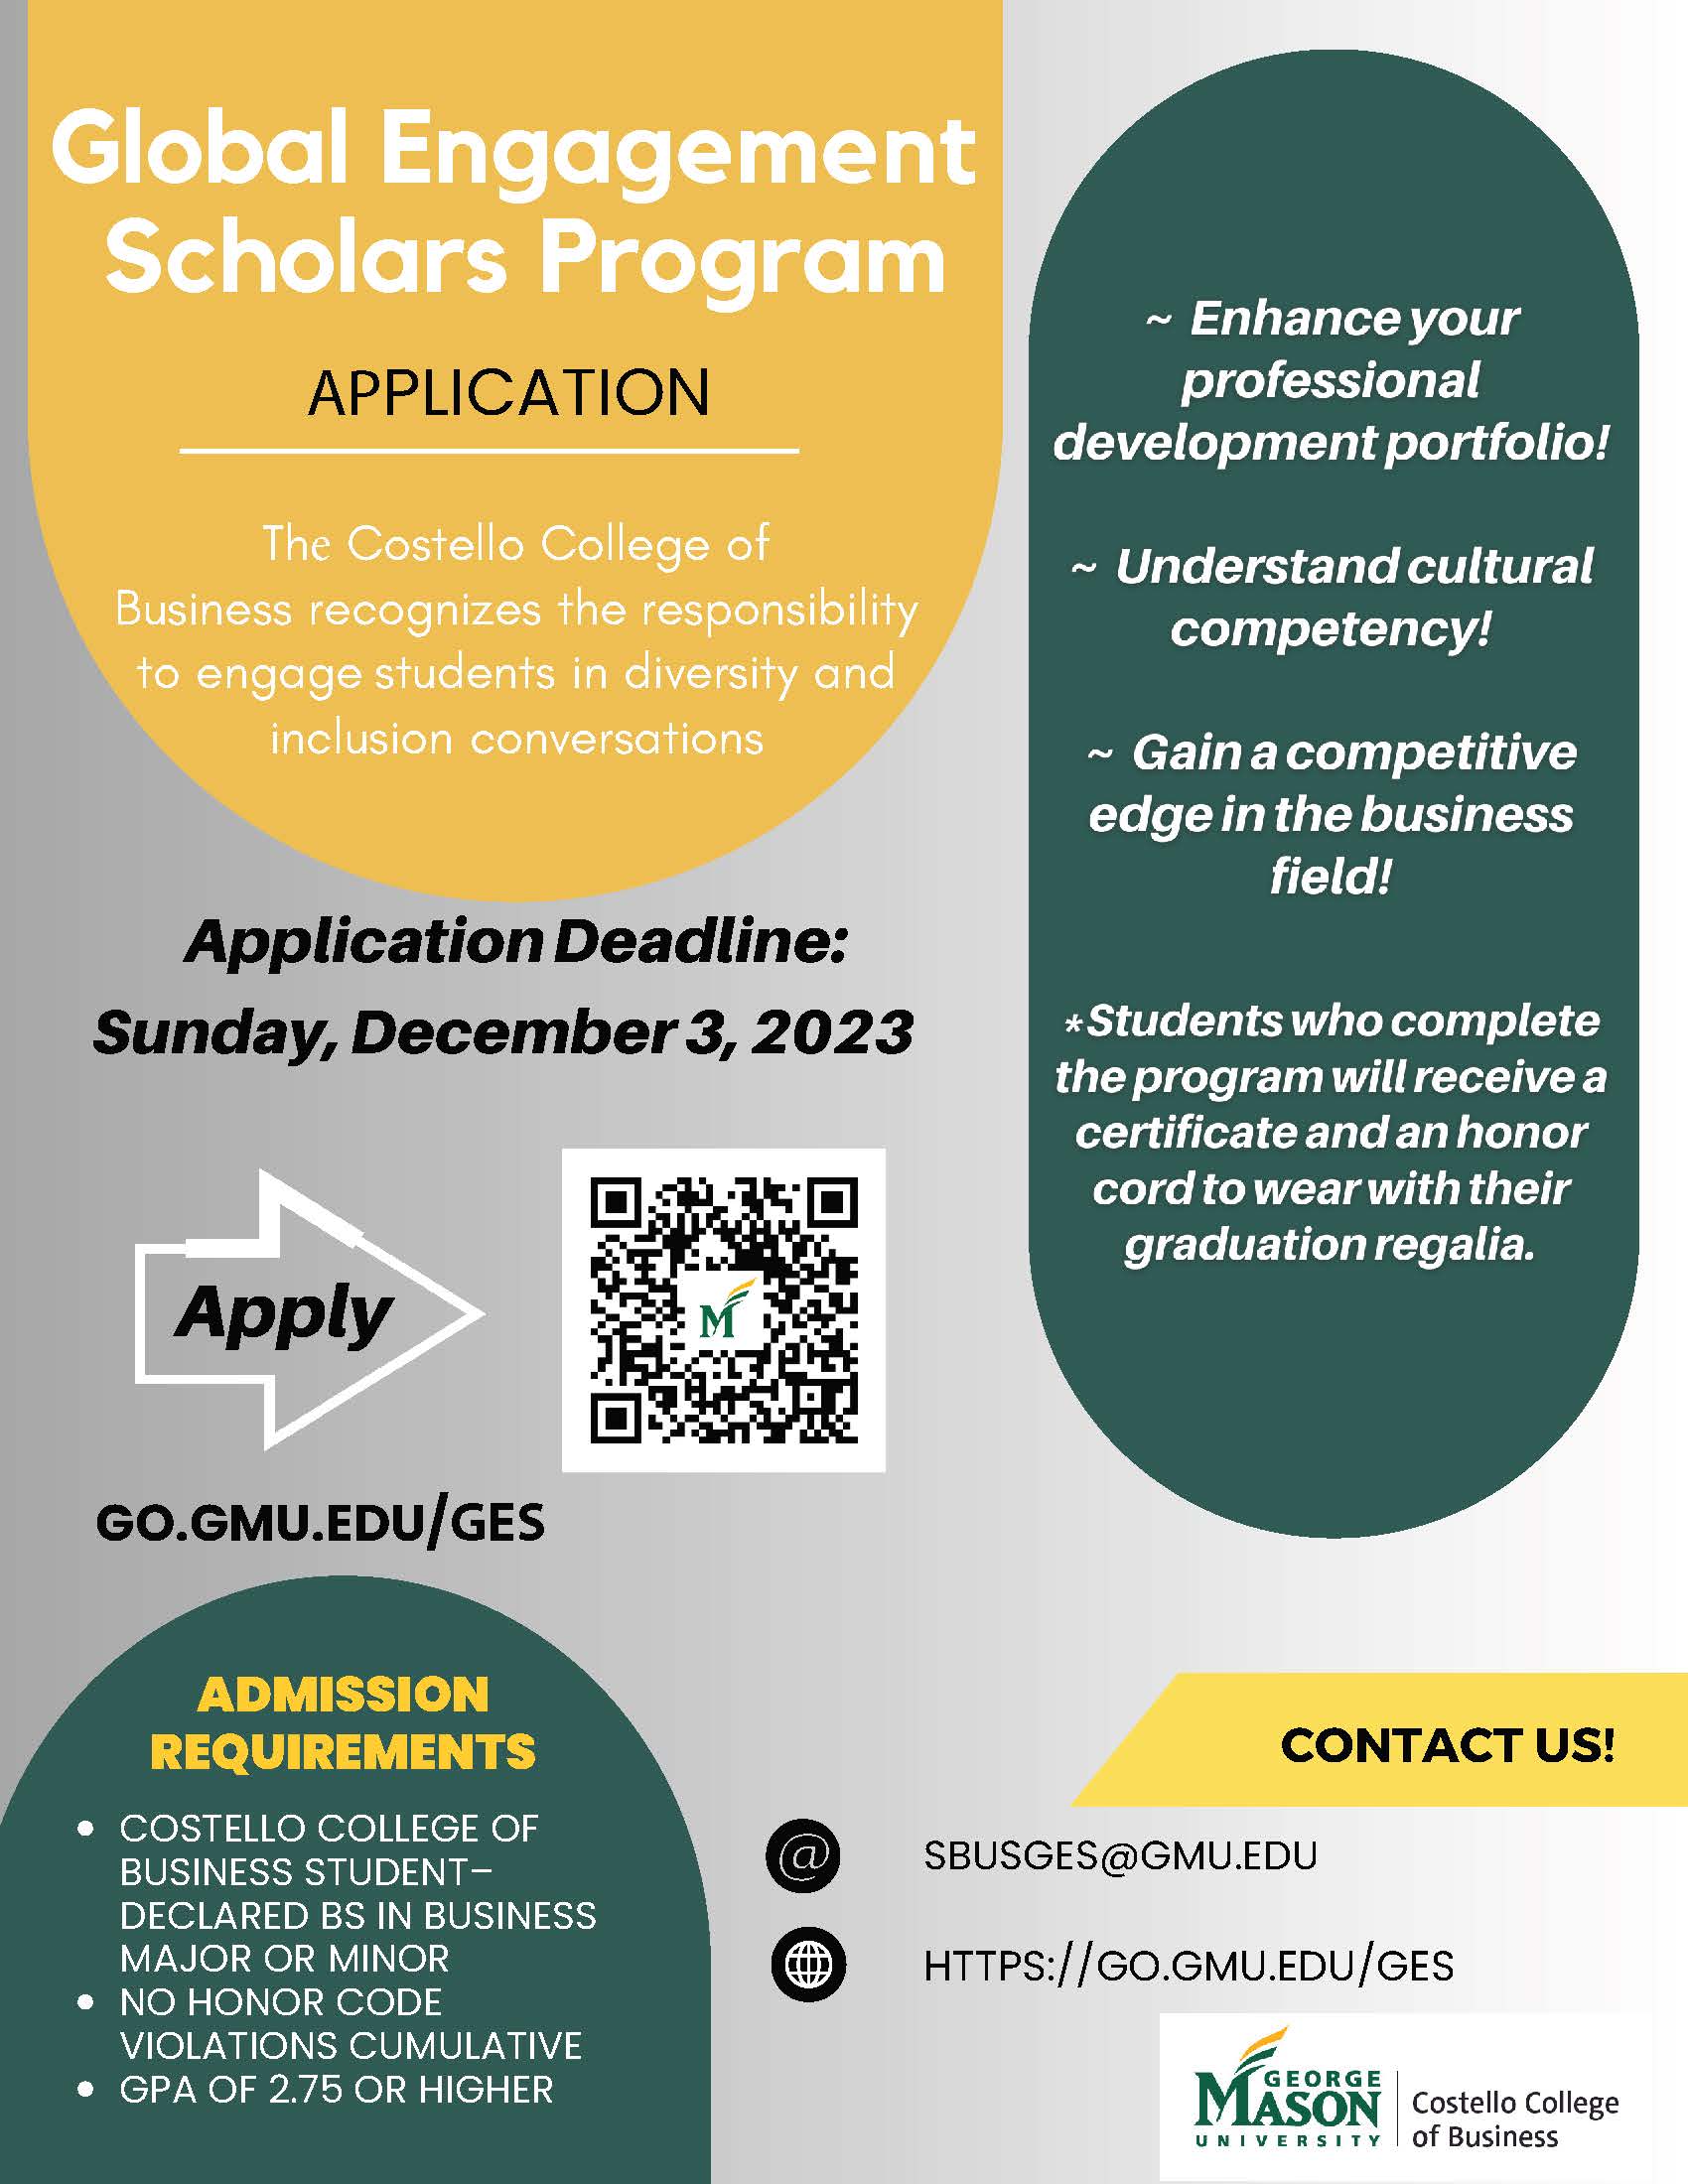 Costello College of Business - Global Engagement Scholars Application Open - Due December 3, 2023